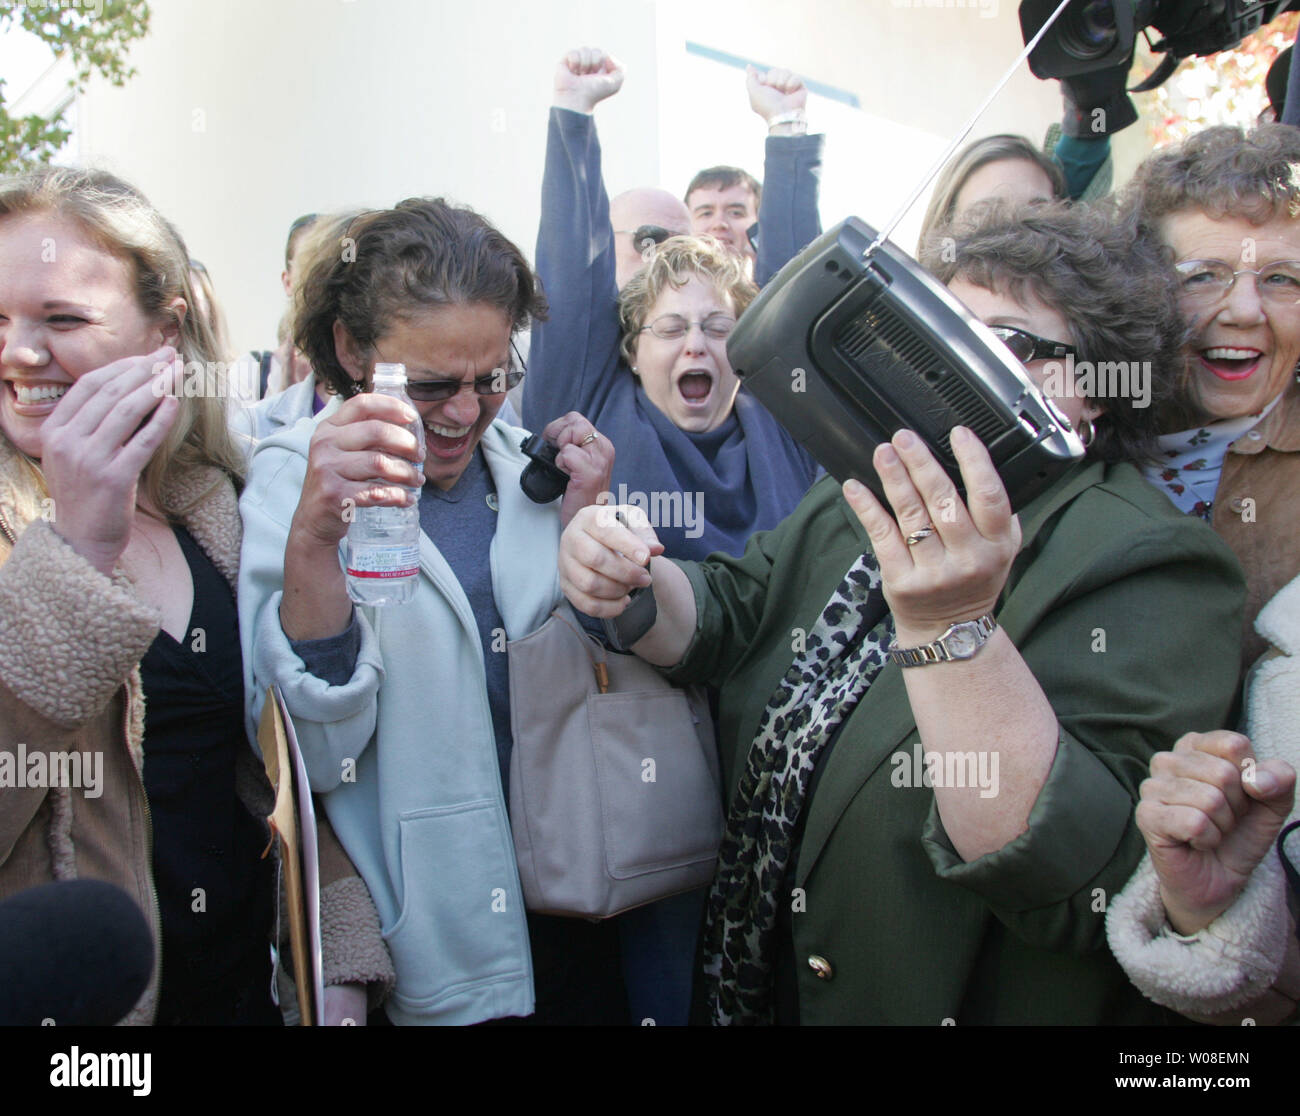 Spectators gathered around a radio react to the verdict in the Scott Peterson murder trial on the street outside the courthouse in Redwood City, California on November 12, 2004. Peterson was found guilty of murdering his wife Laci and unborn son.  (UPI Photo/Terry Schmitt) Stock Photo